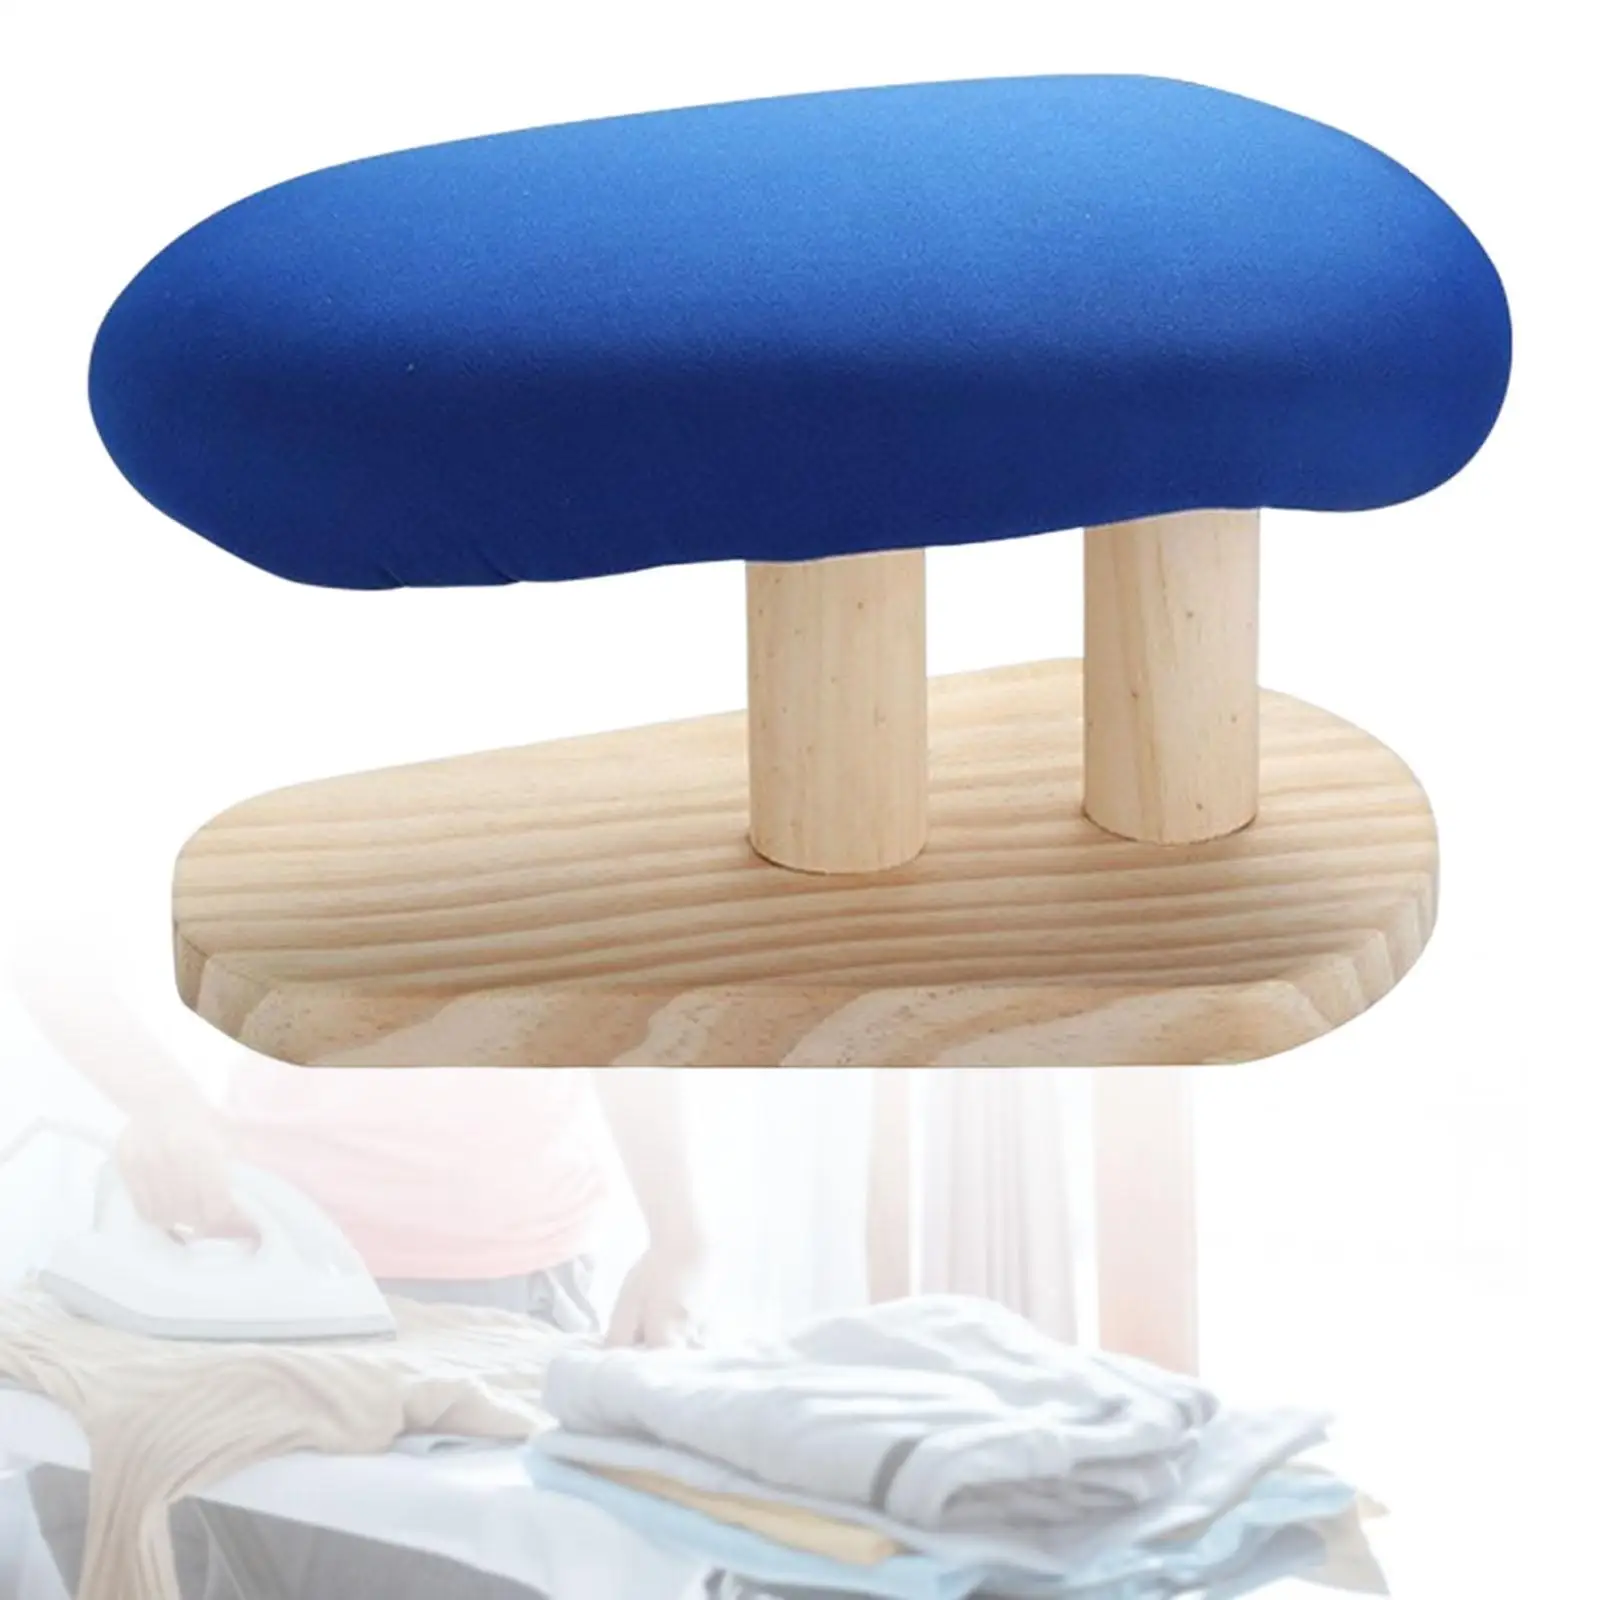 lingyoucraft Tabletop Ironing Board Ironing Pad Small Table Gadget for Household